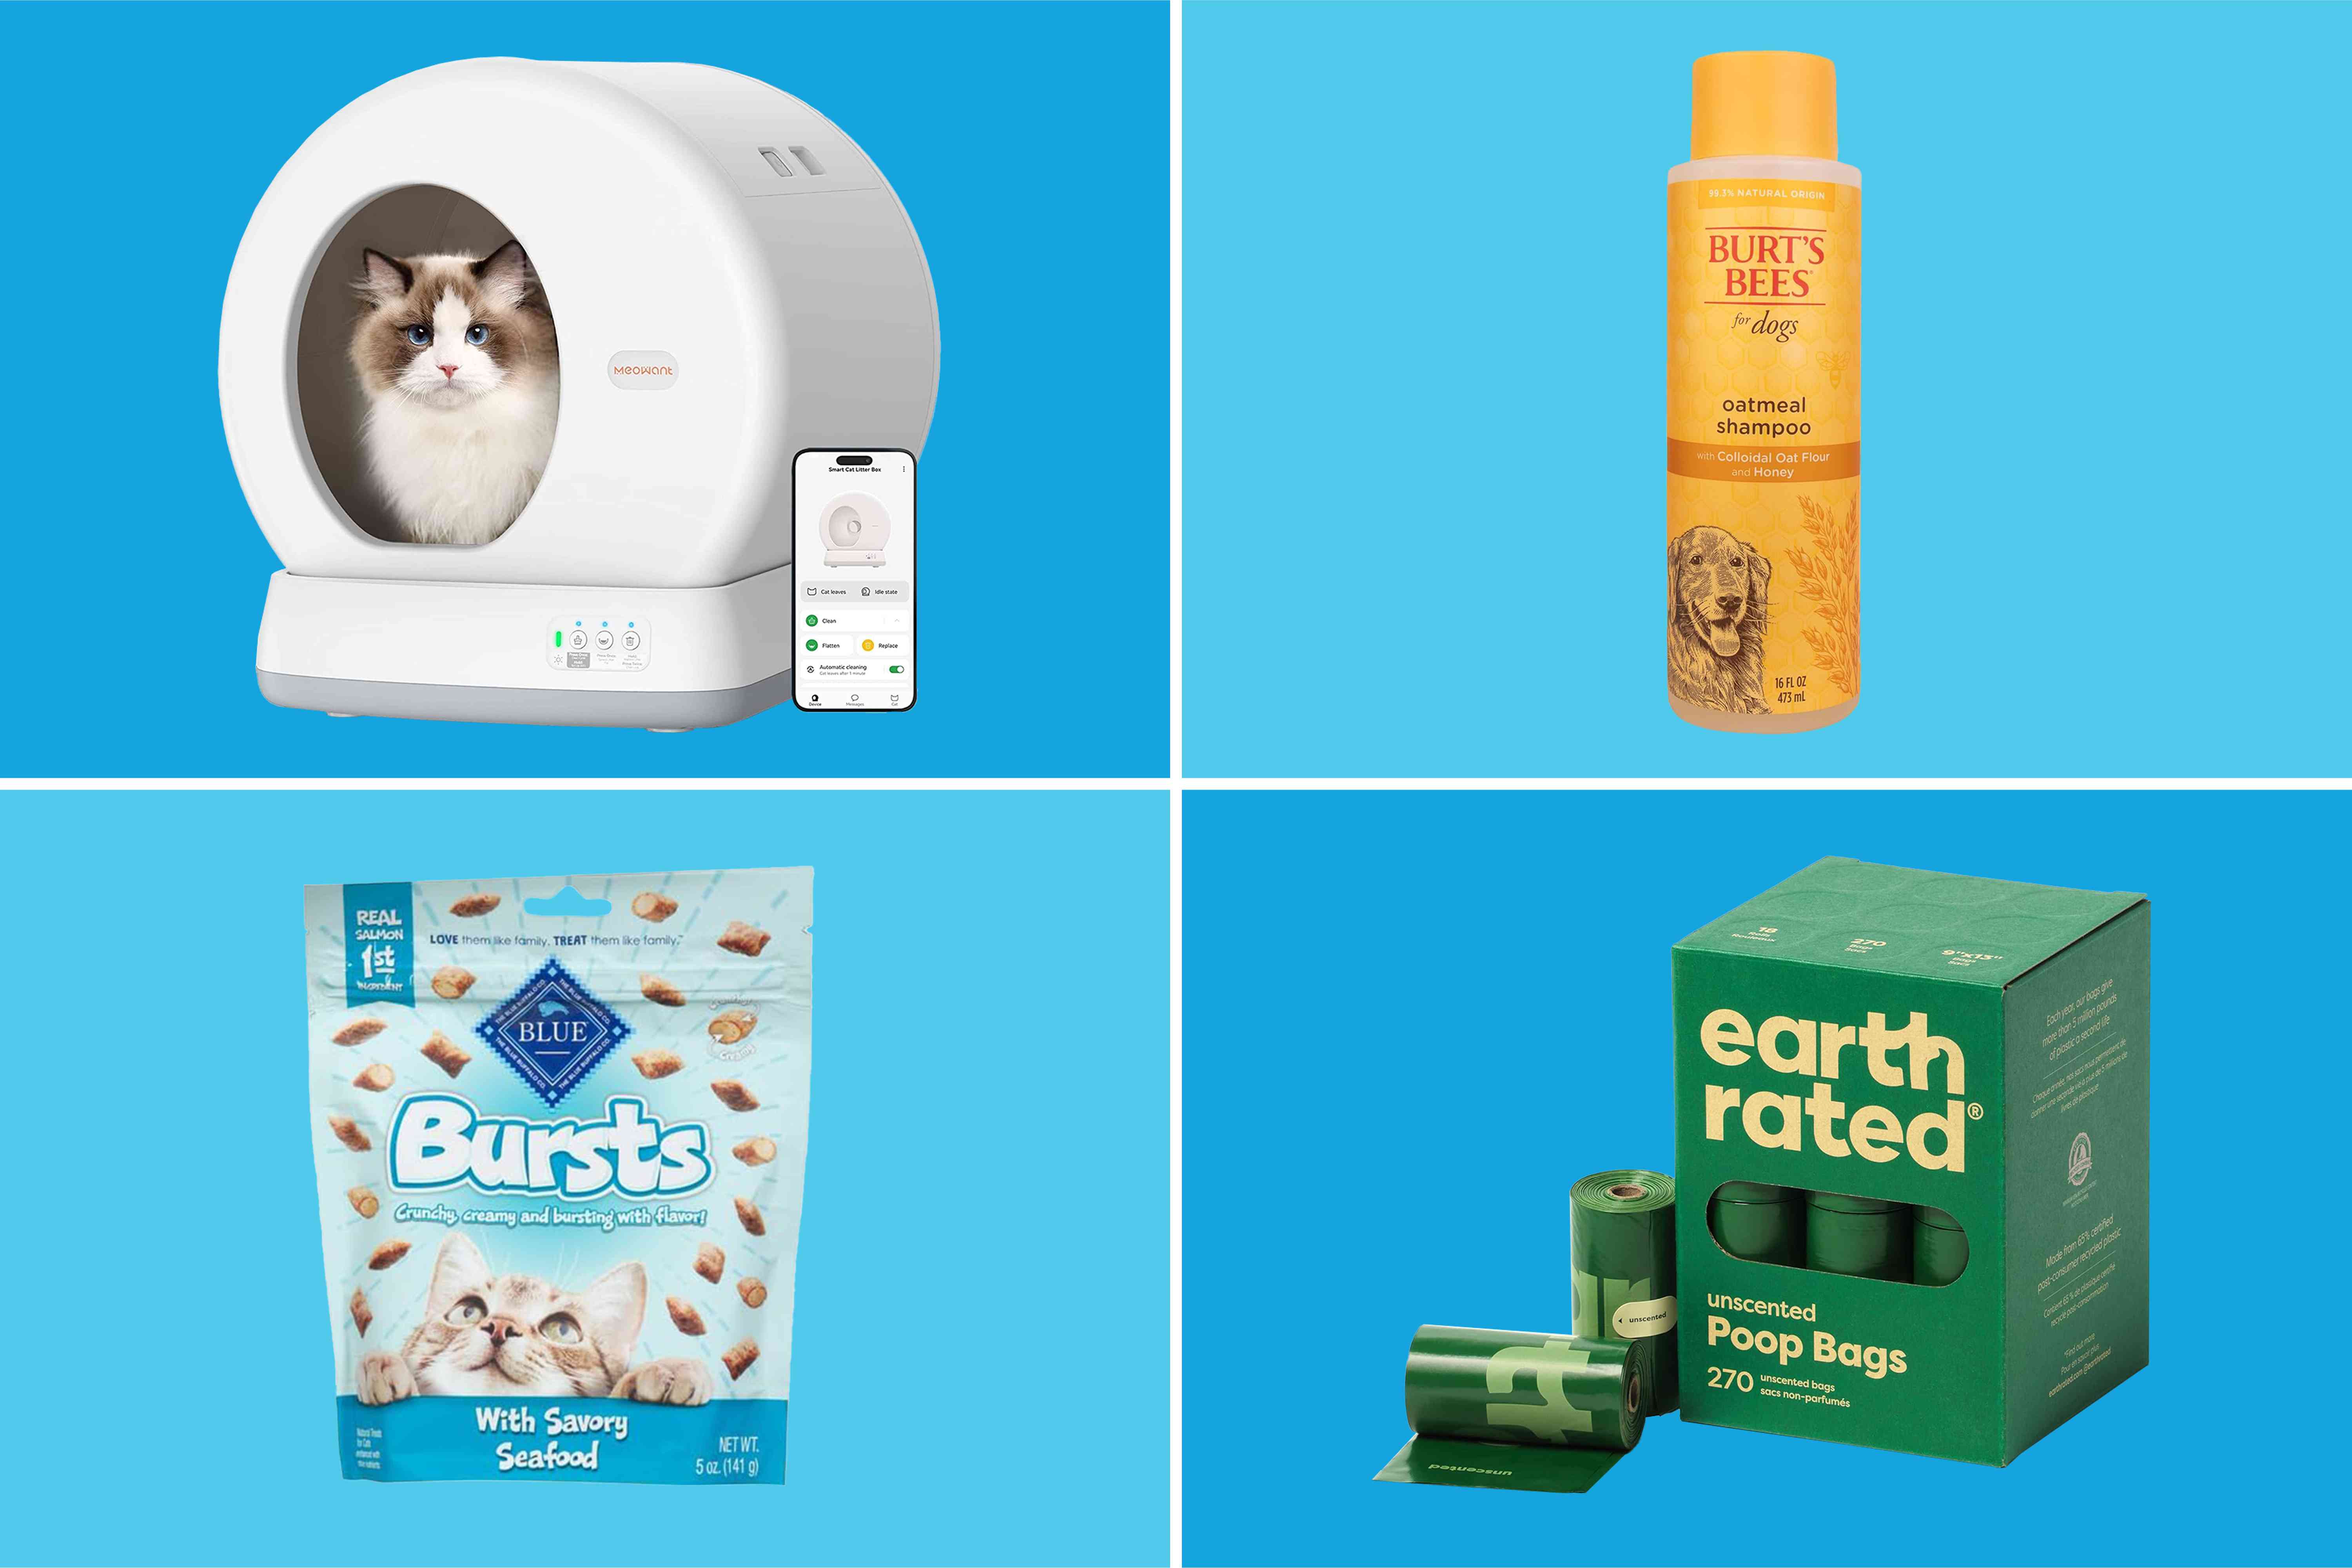 Amazon Is Having a 48-Hour Sale on Daily Pet Supplies, and the 12 Deals Worth Adding to Your Cart Start at $2